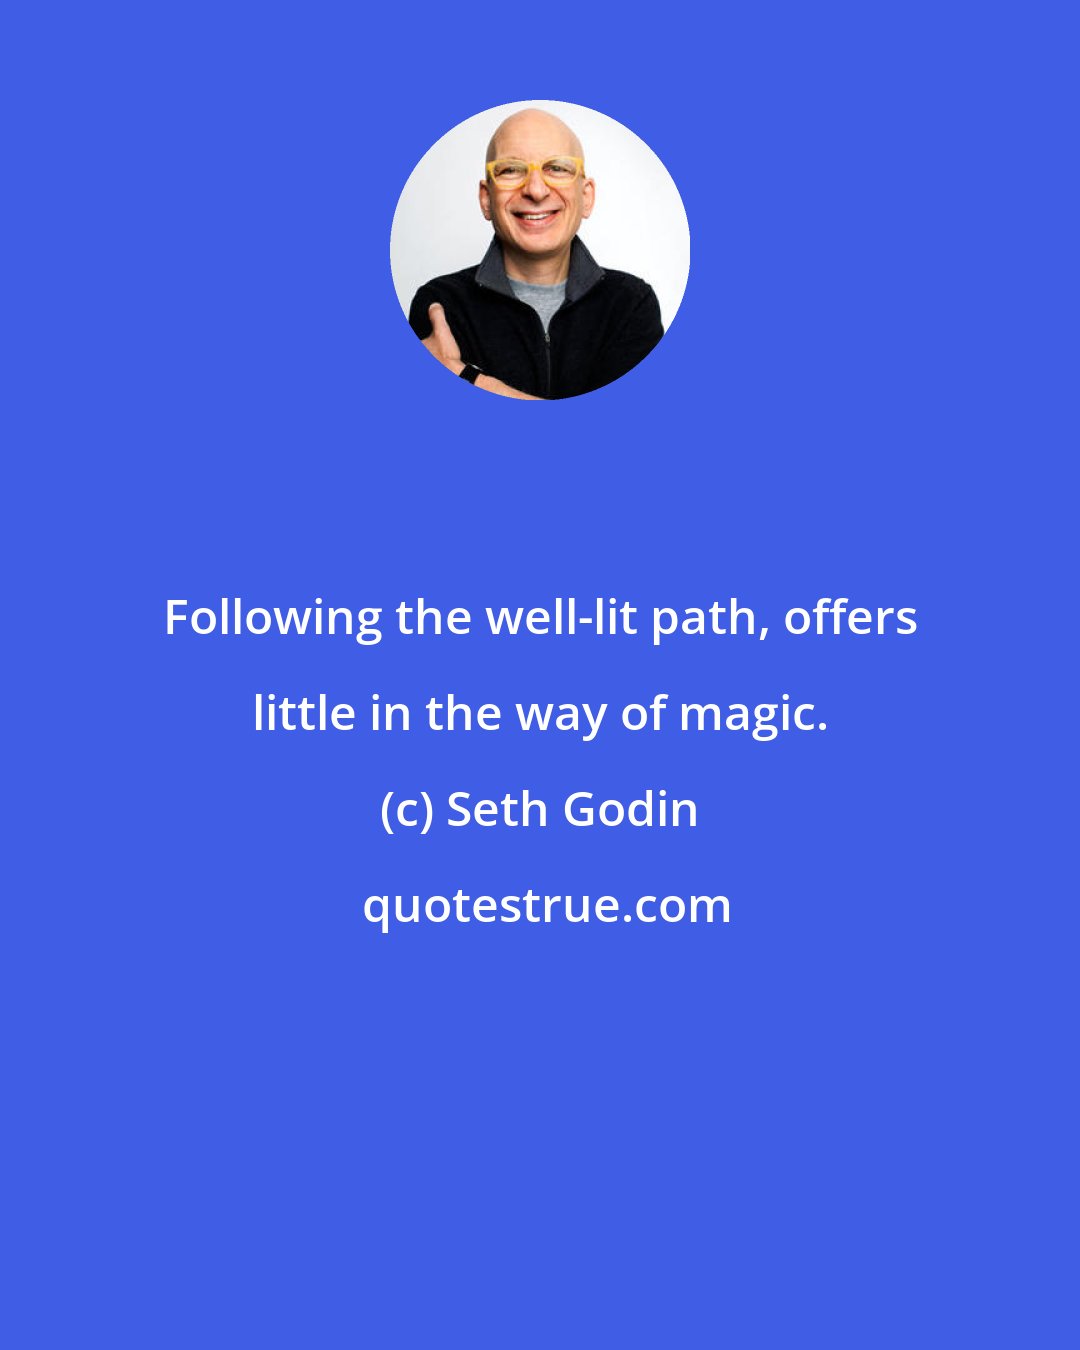 Seth Godin: Following the well-lit path, offers little in the way of magic.